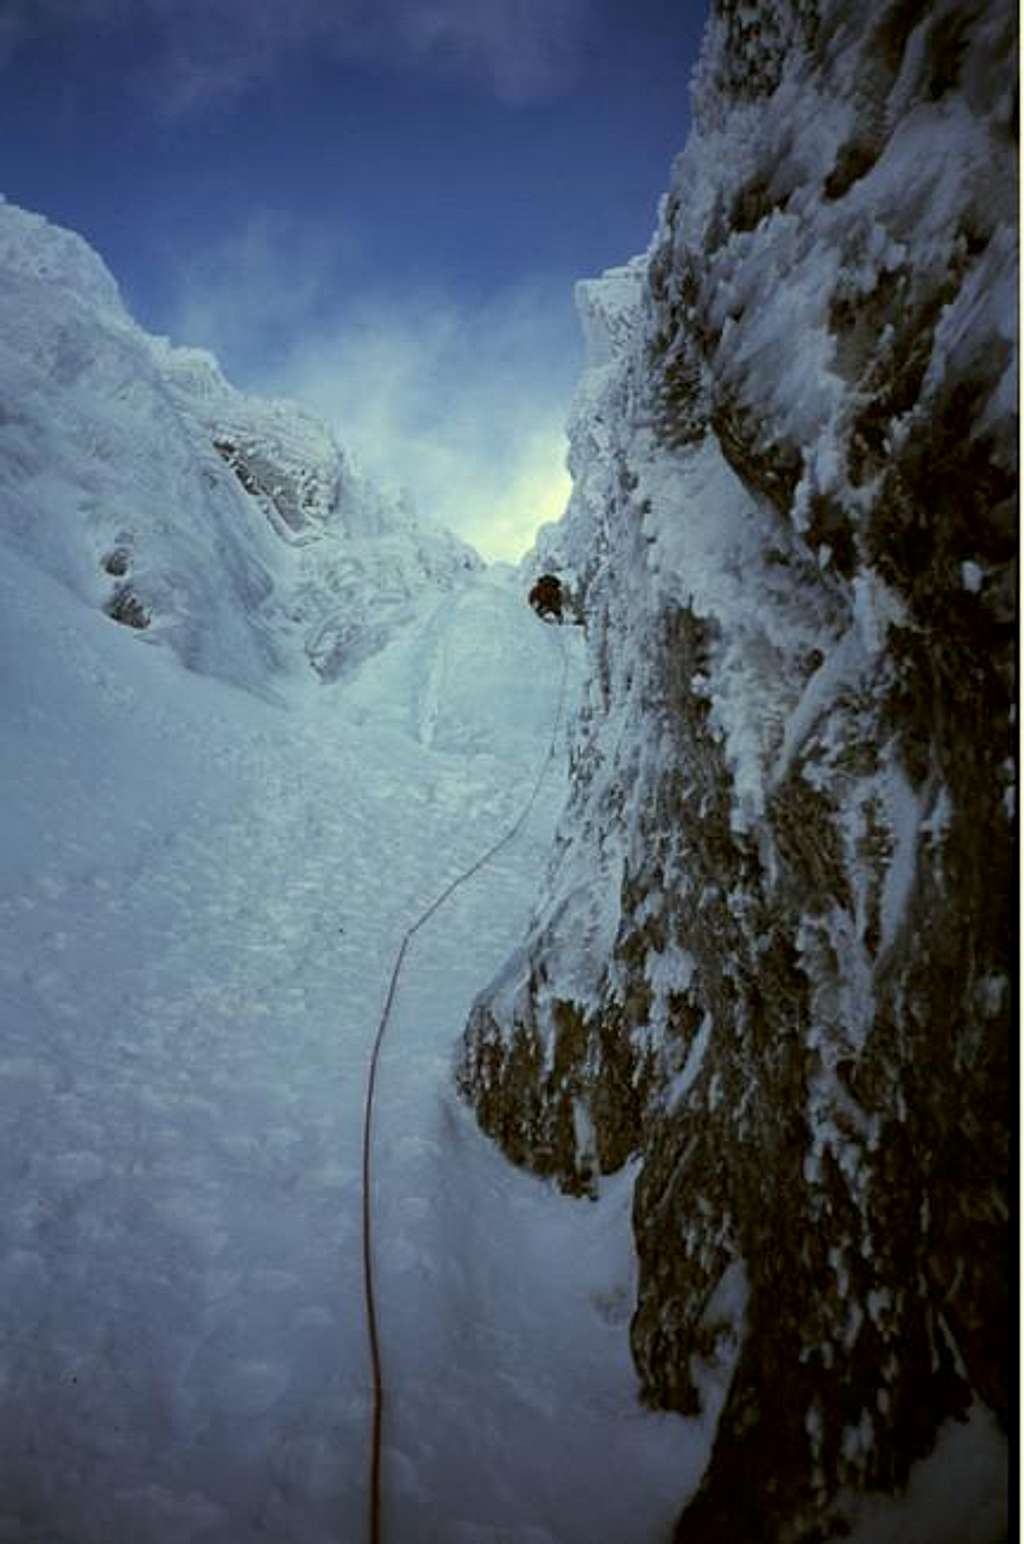 Ian Parnell leading pitch 4